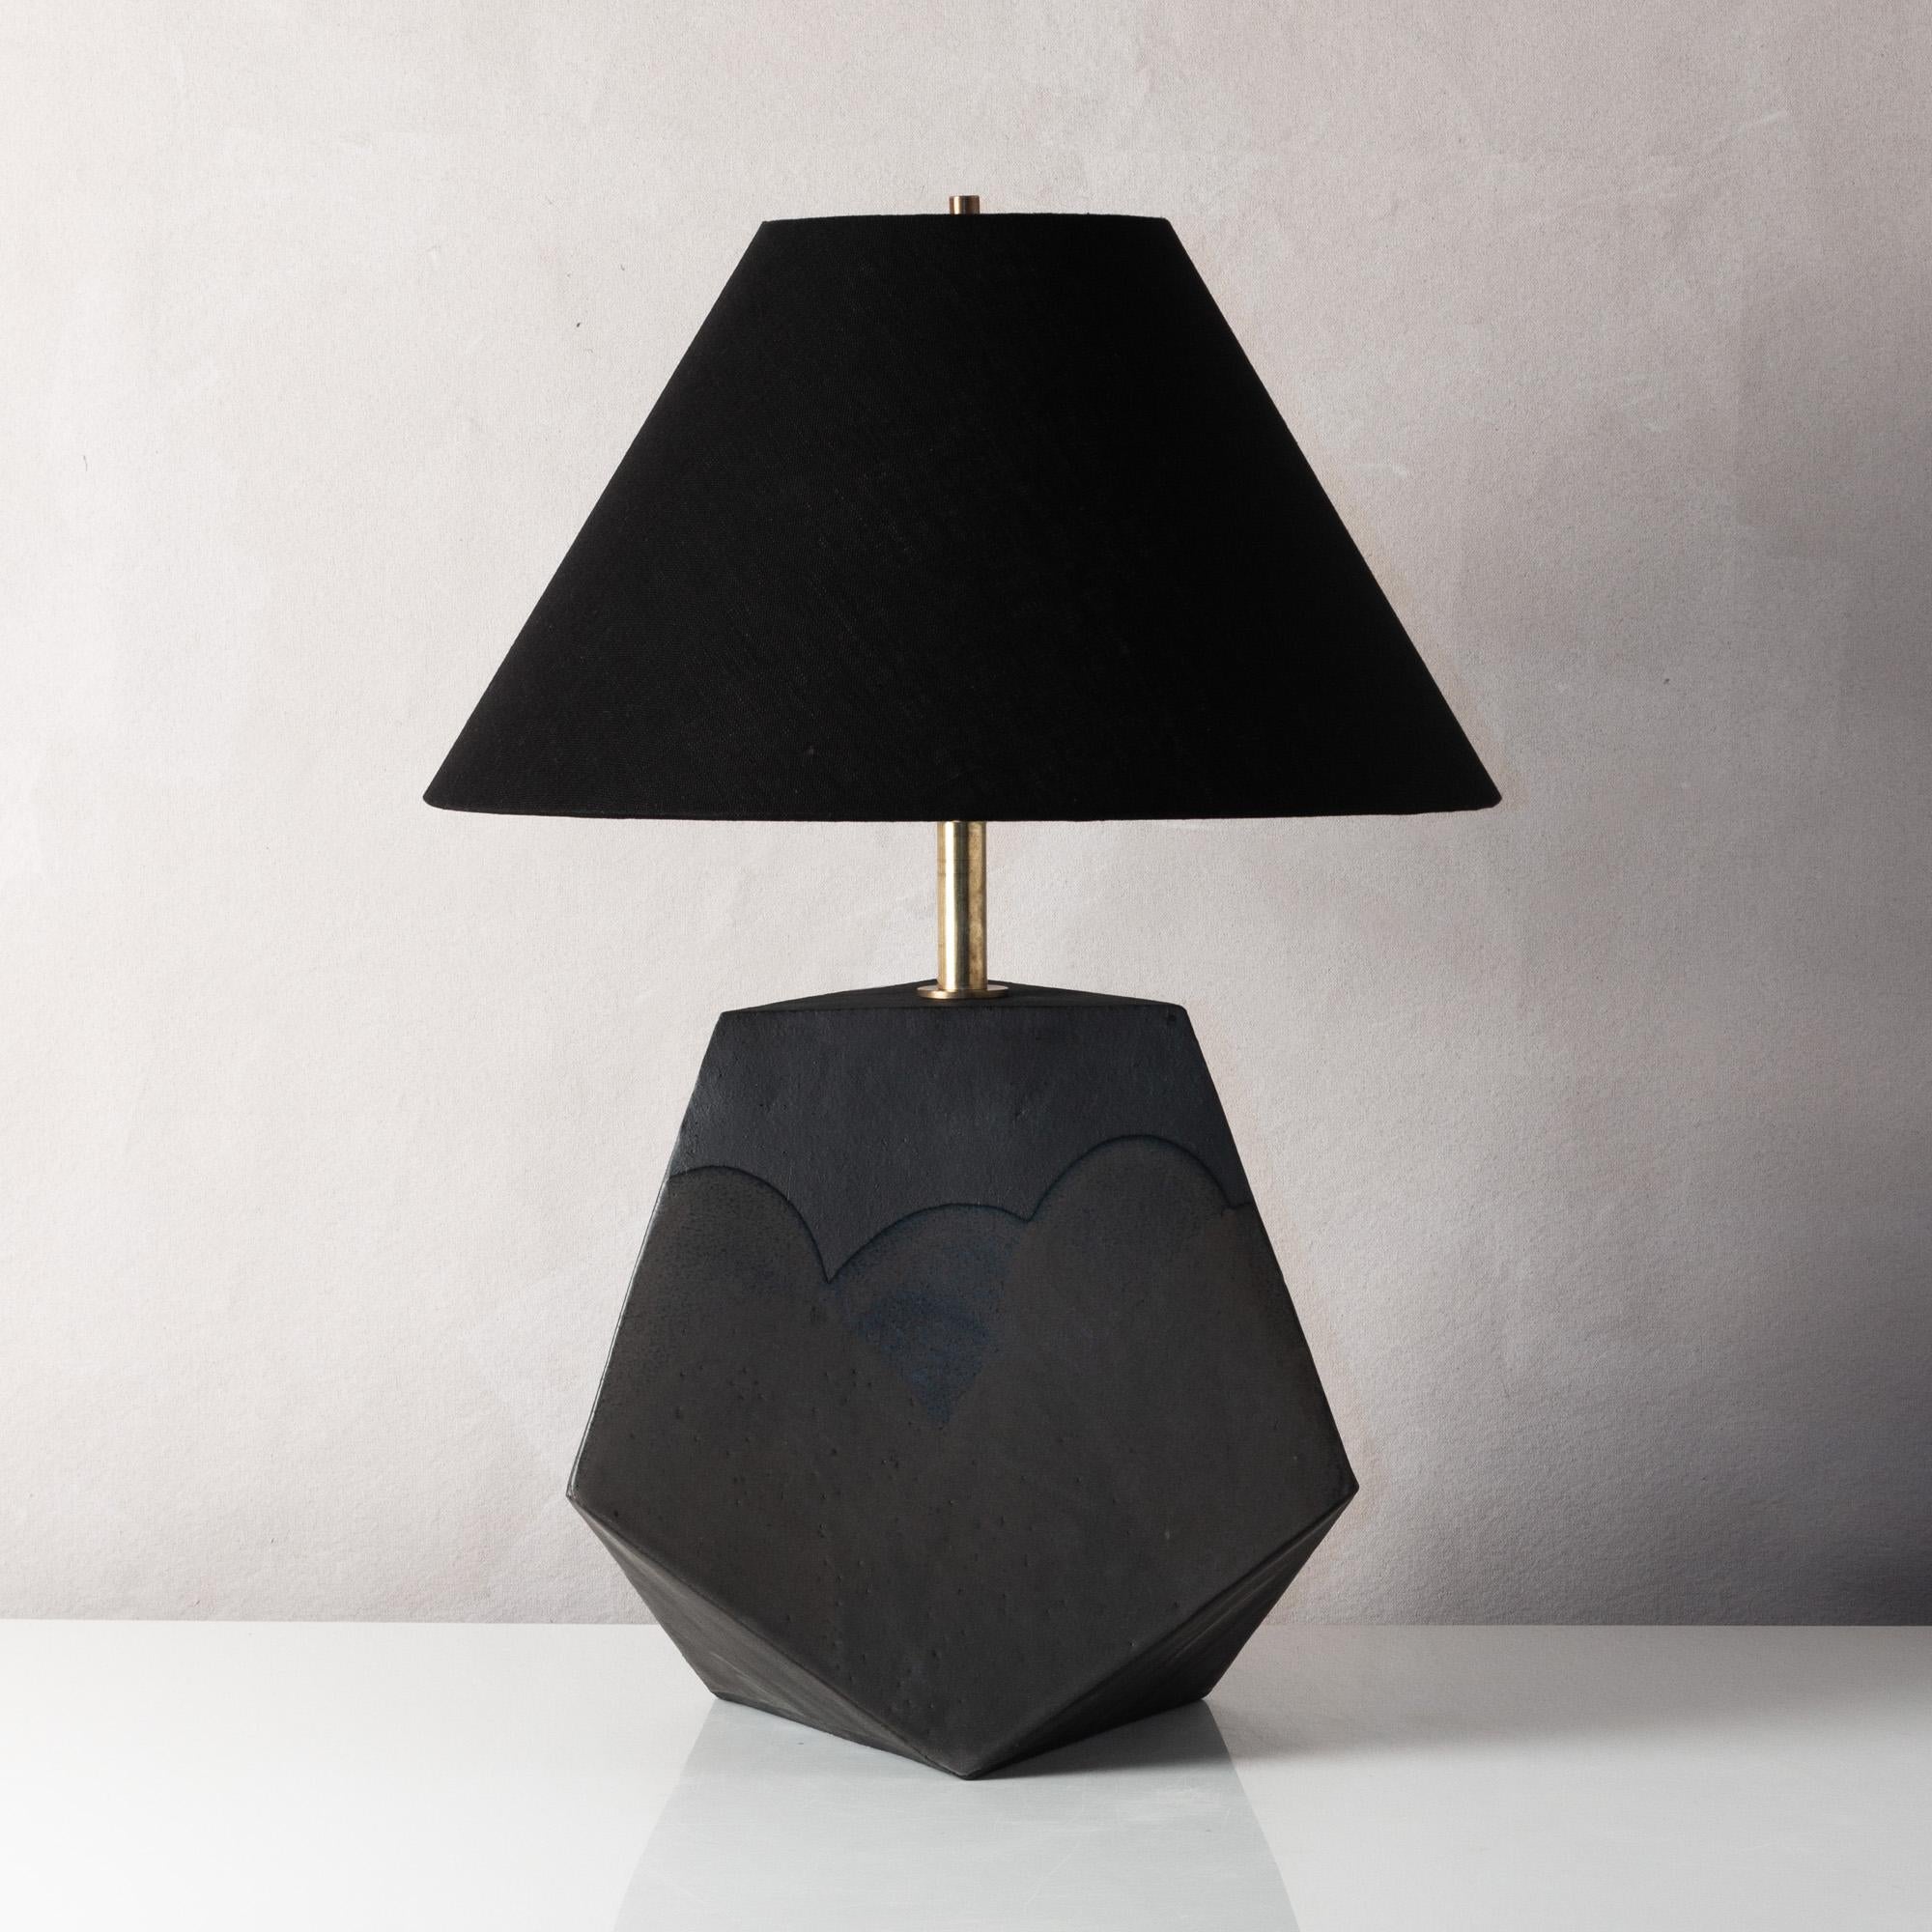 This bold geometric ceramic lamp is made from a rich red-brown clay, formed into a dramatic pyramid shape, and featuring an organic matte finish accented by hand-poured satin glaze. Each piece is individually handmade and entirely